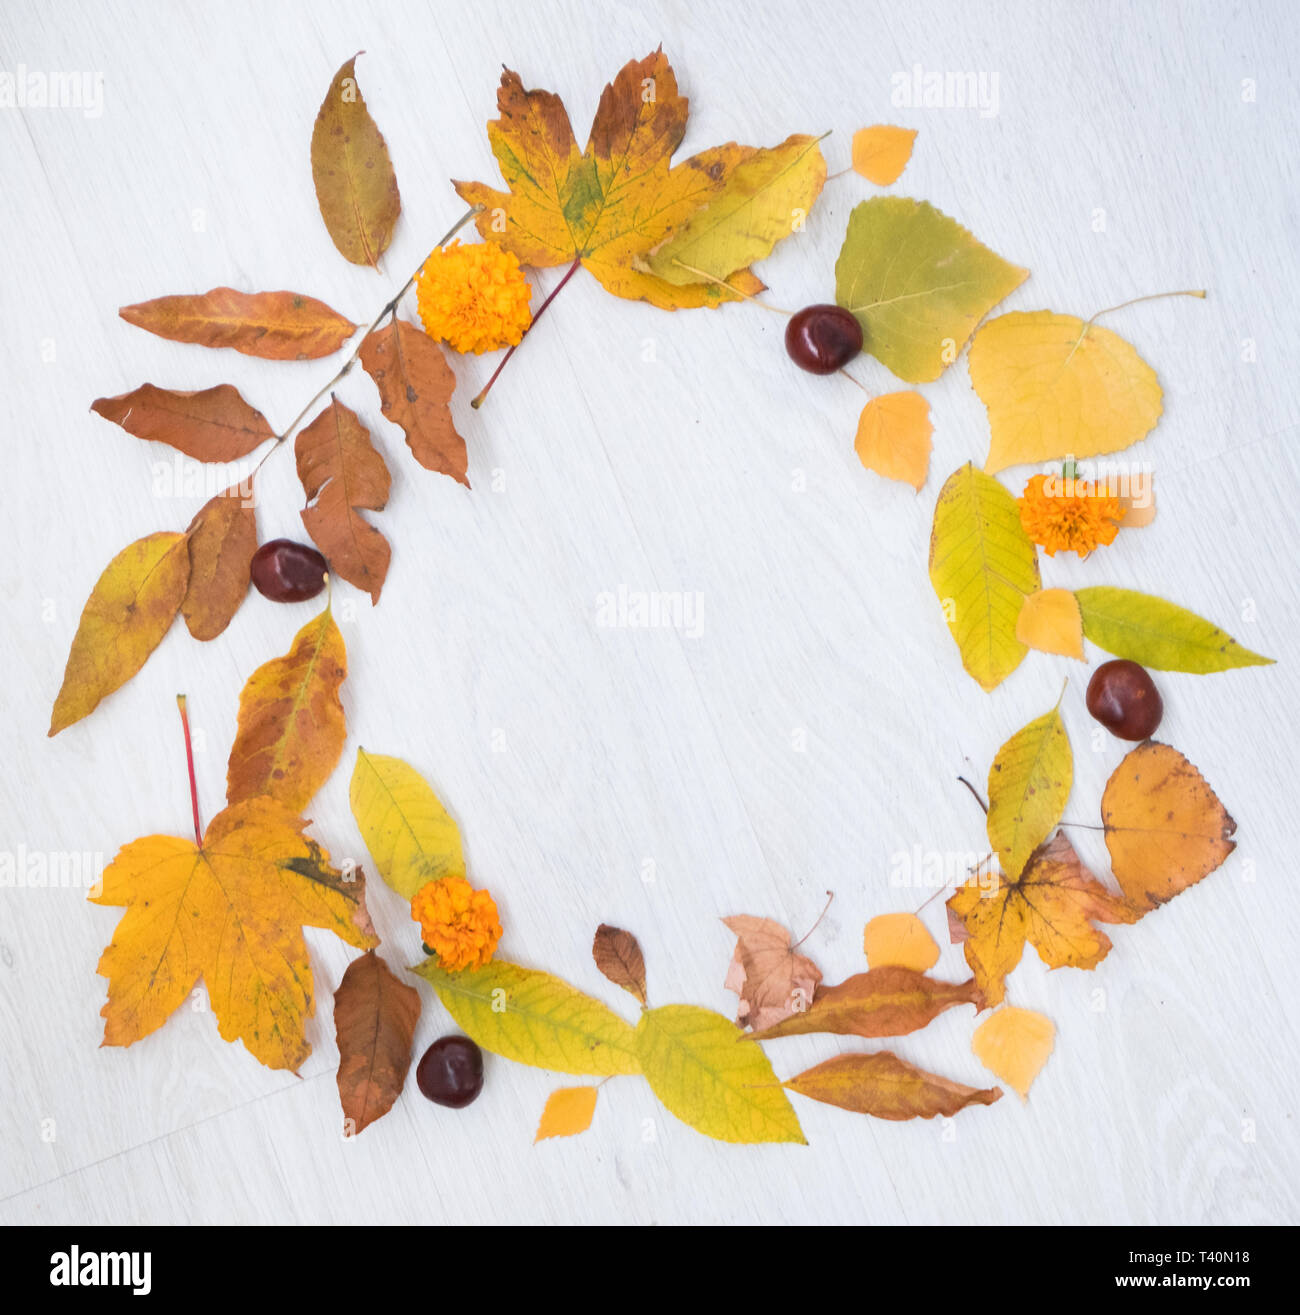 Autumn composition. Fall leaves on white background. Flat lay, top view Stock Photo